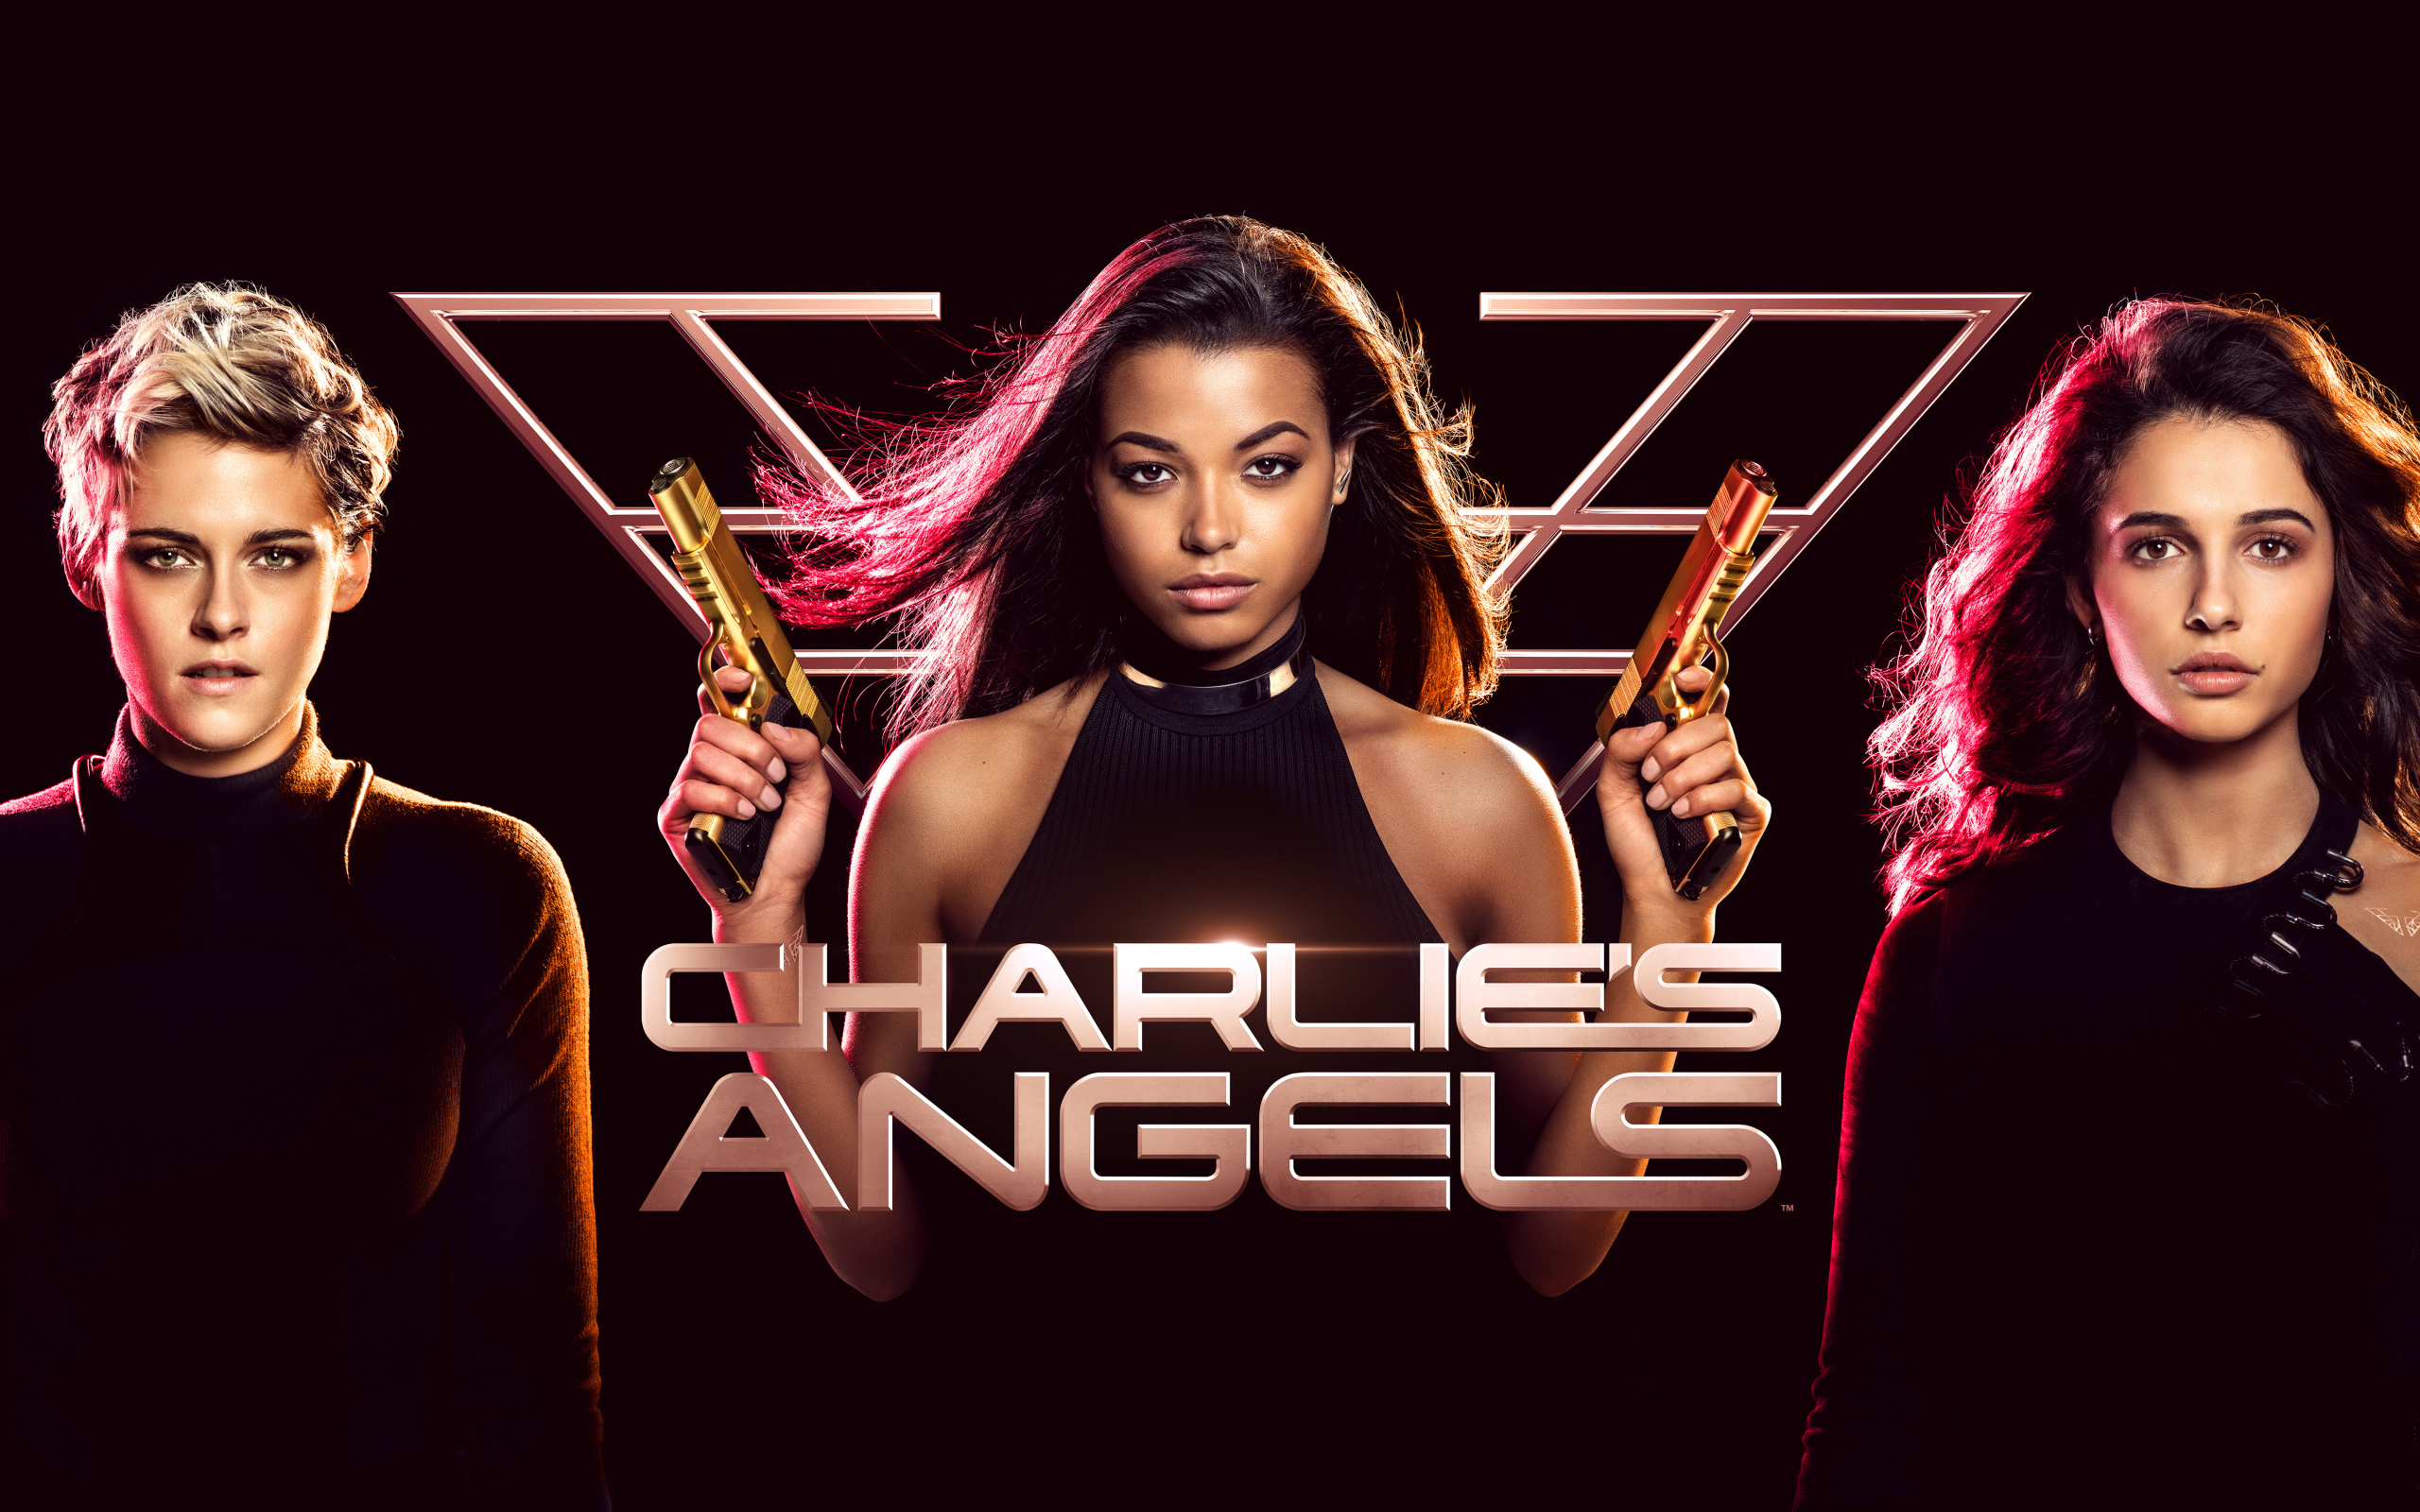 Poster of the new movie Charlie's Angels, 2019